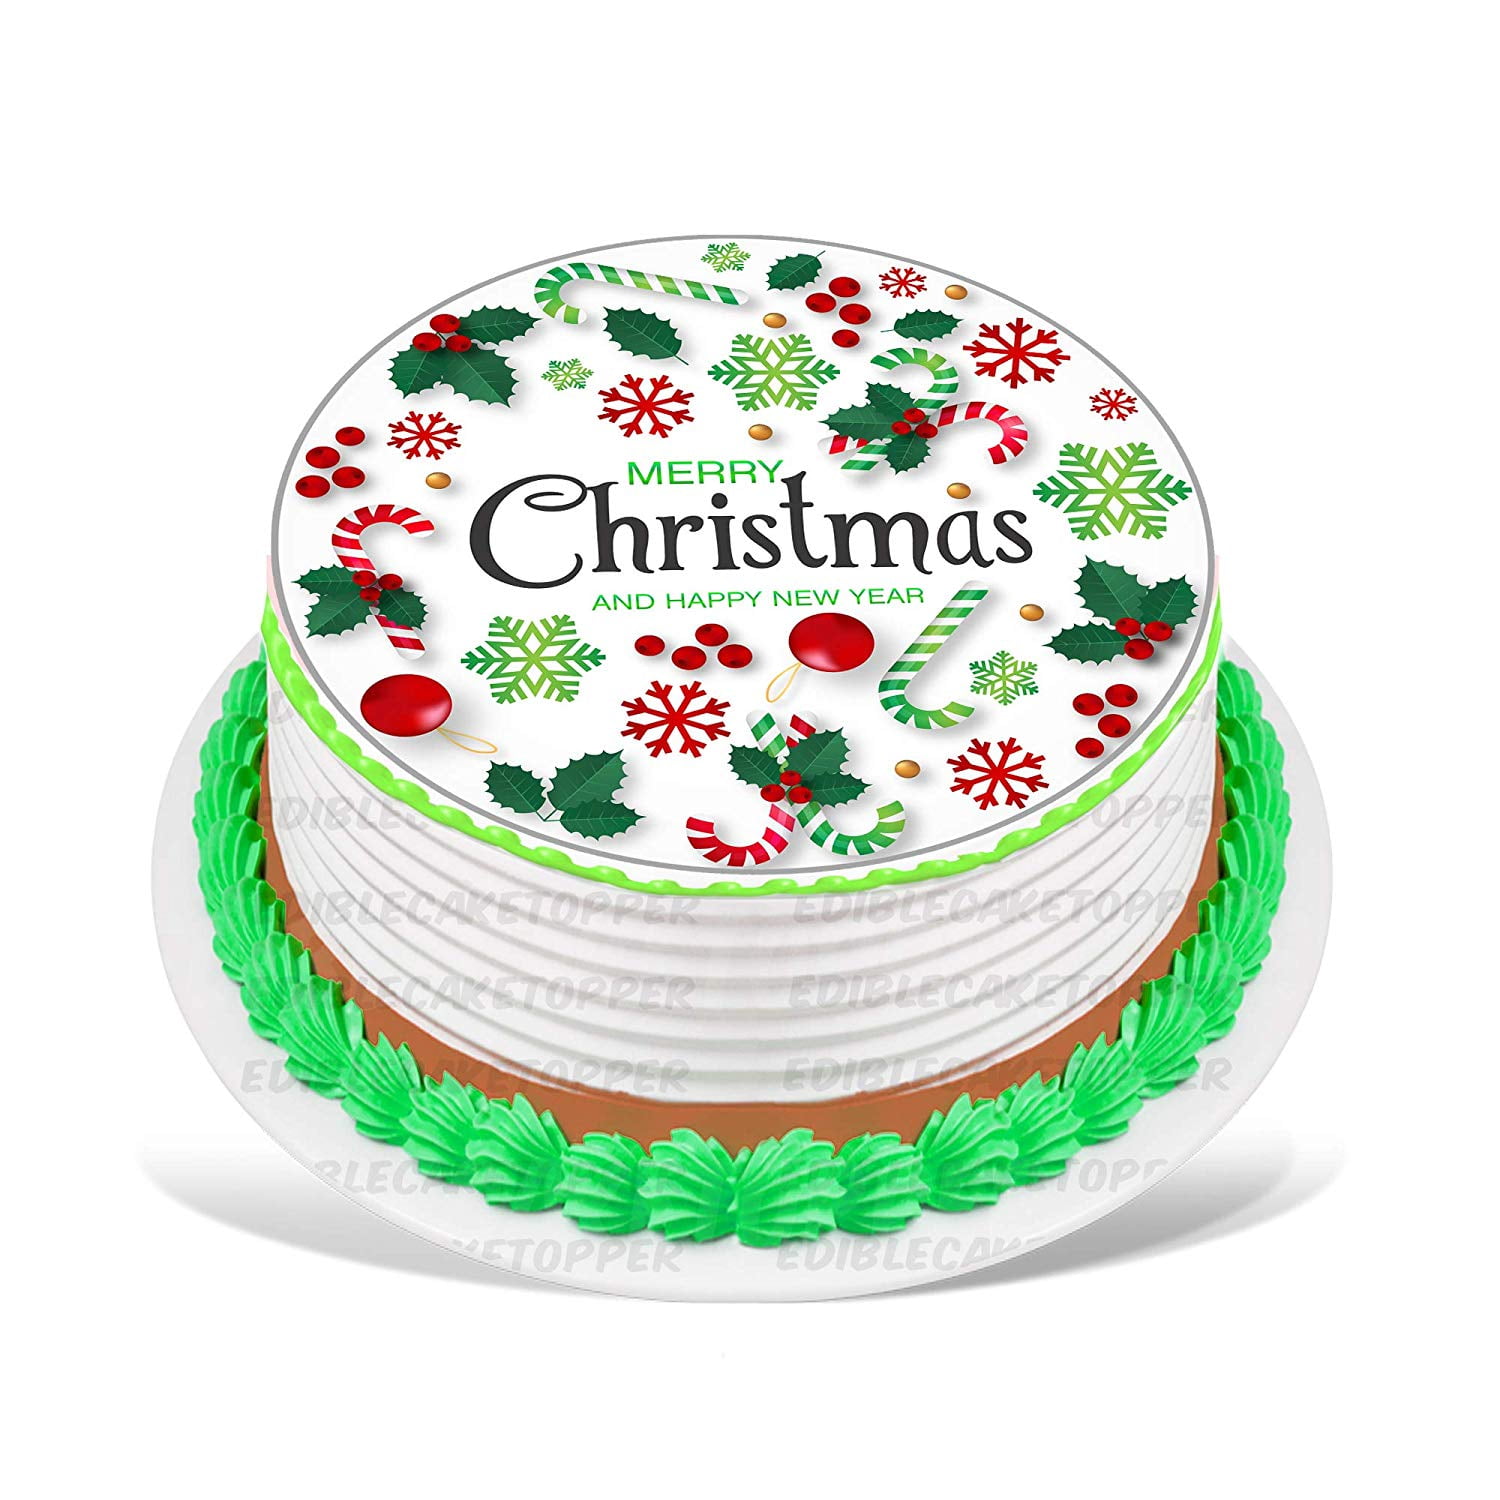 Christmas Holiday Winter Edible Party Cake Image Topper Frosting Icing Sheet